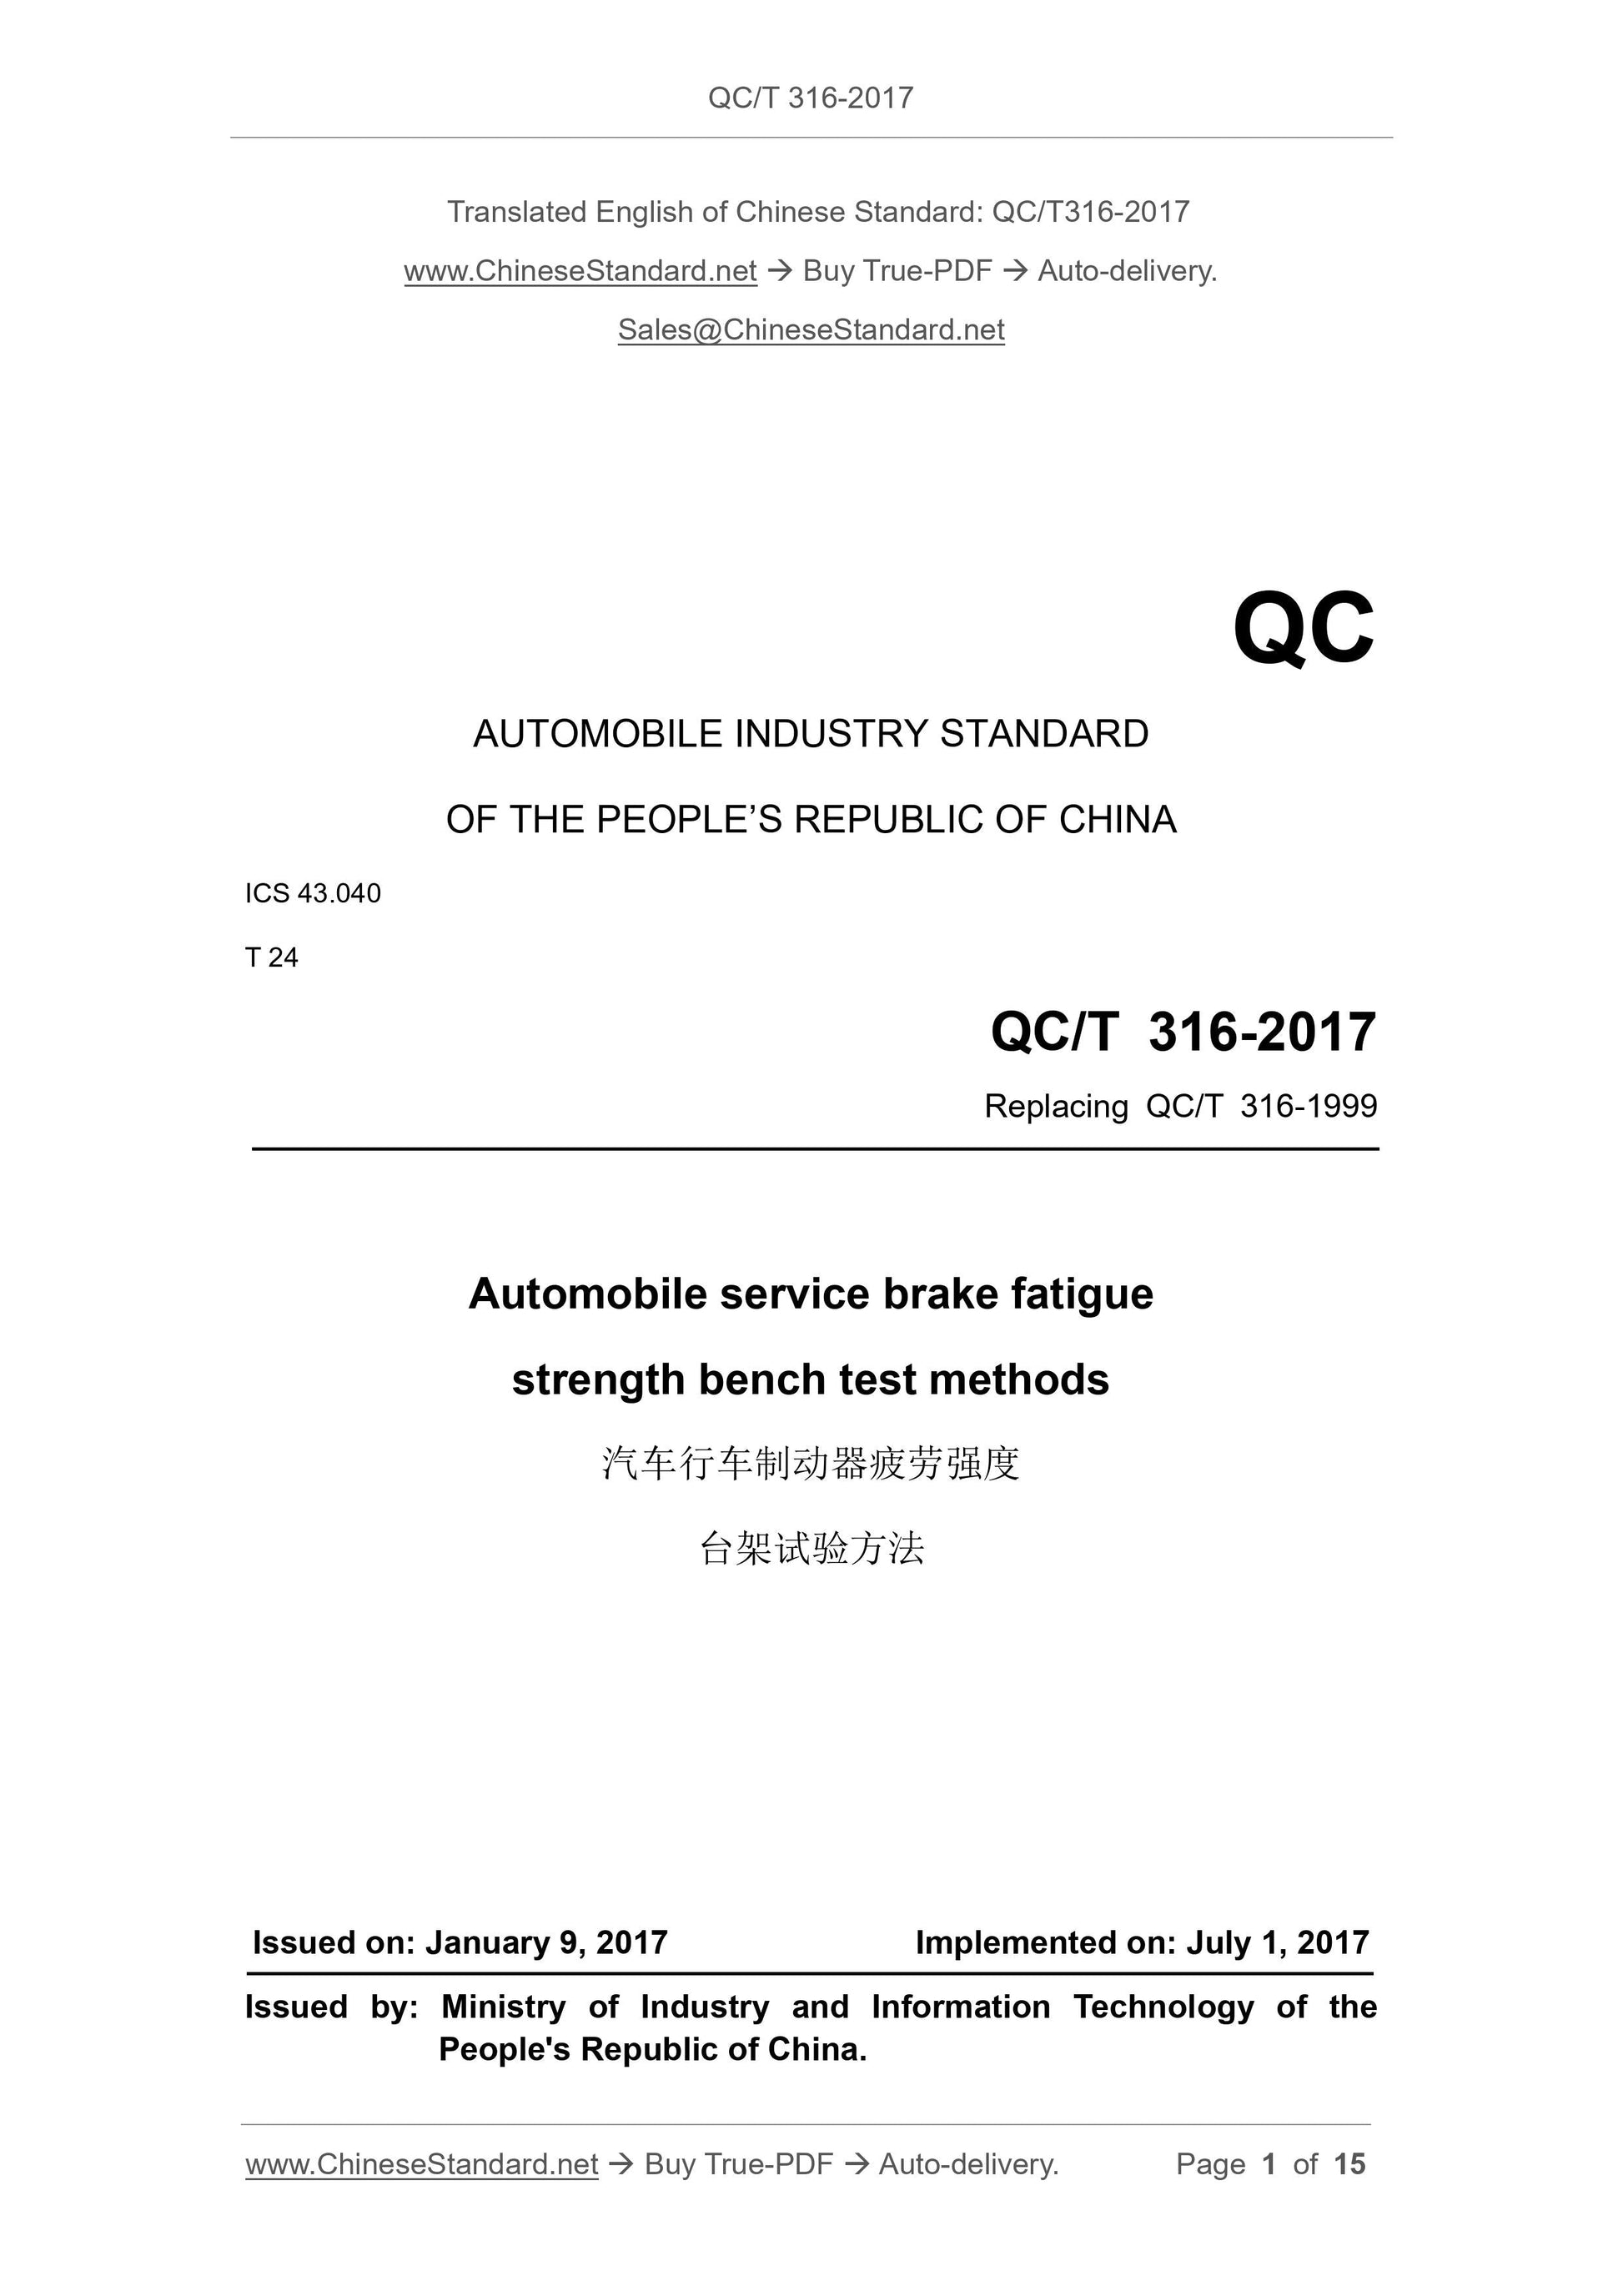 QC/T 316-2017 Page 1